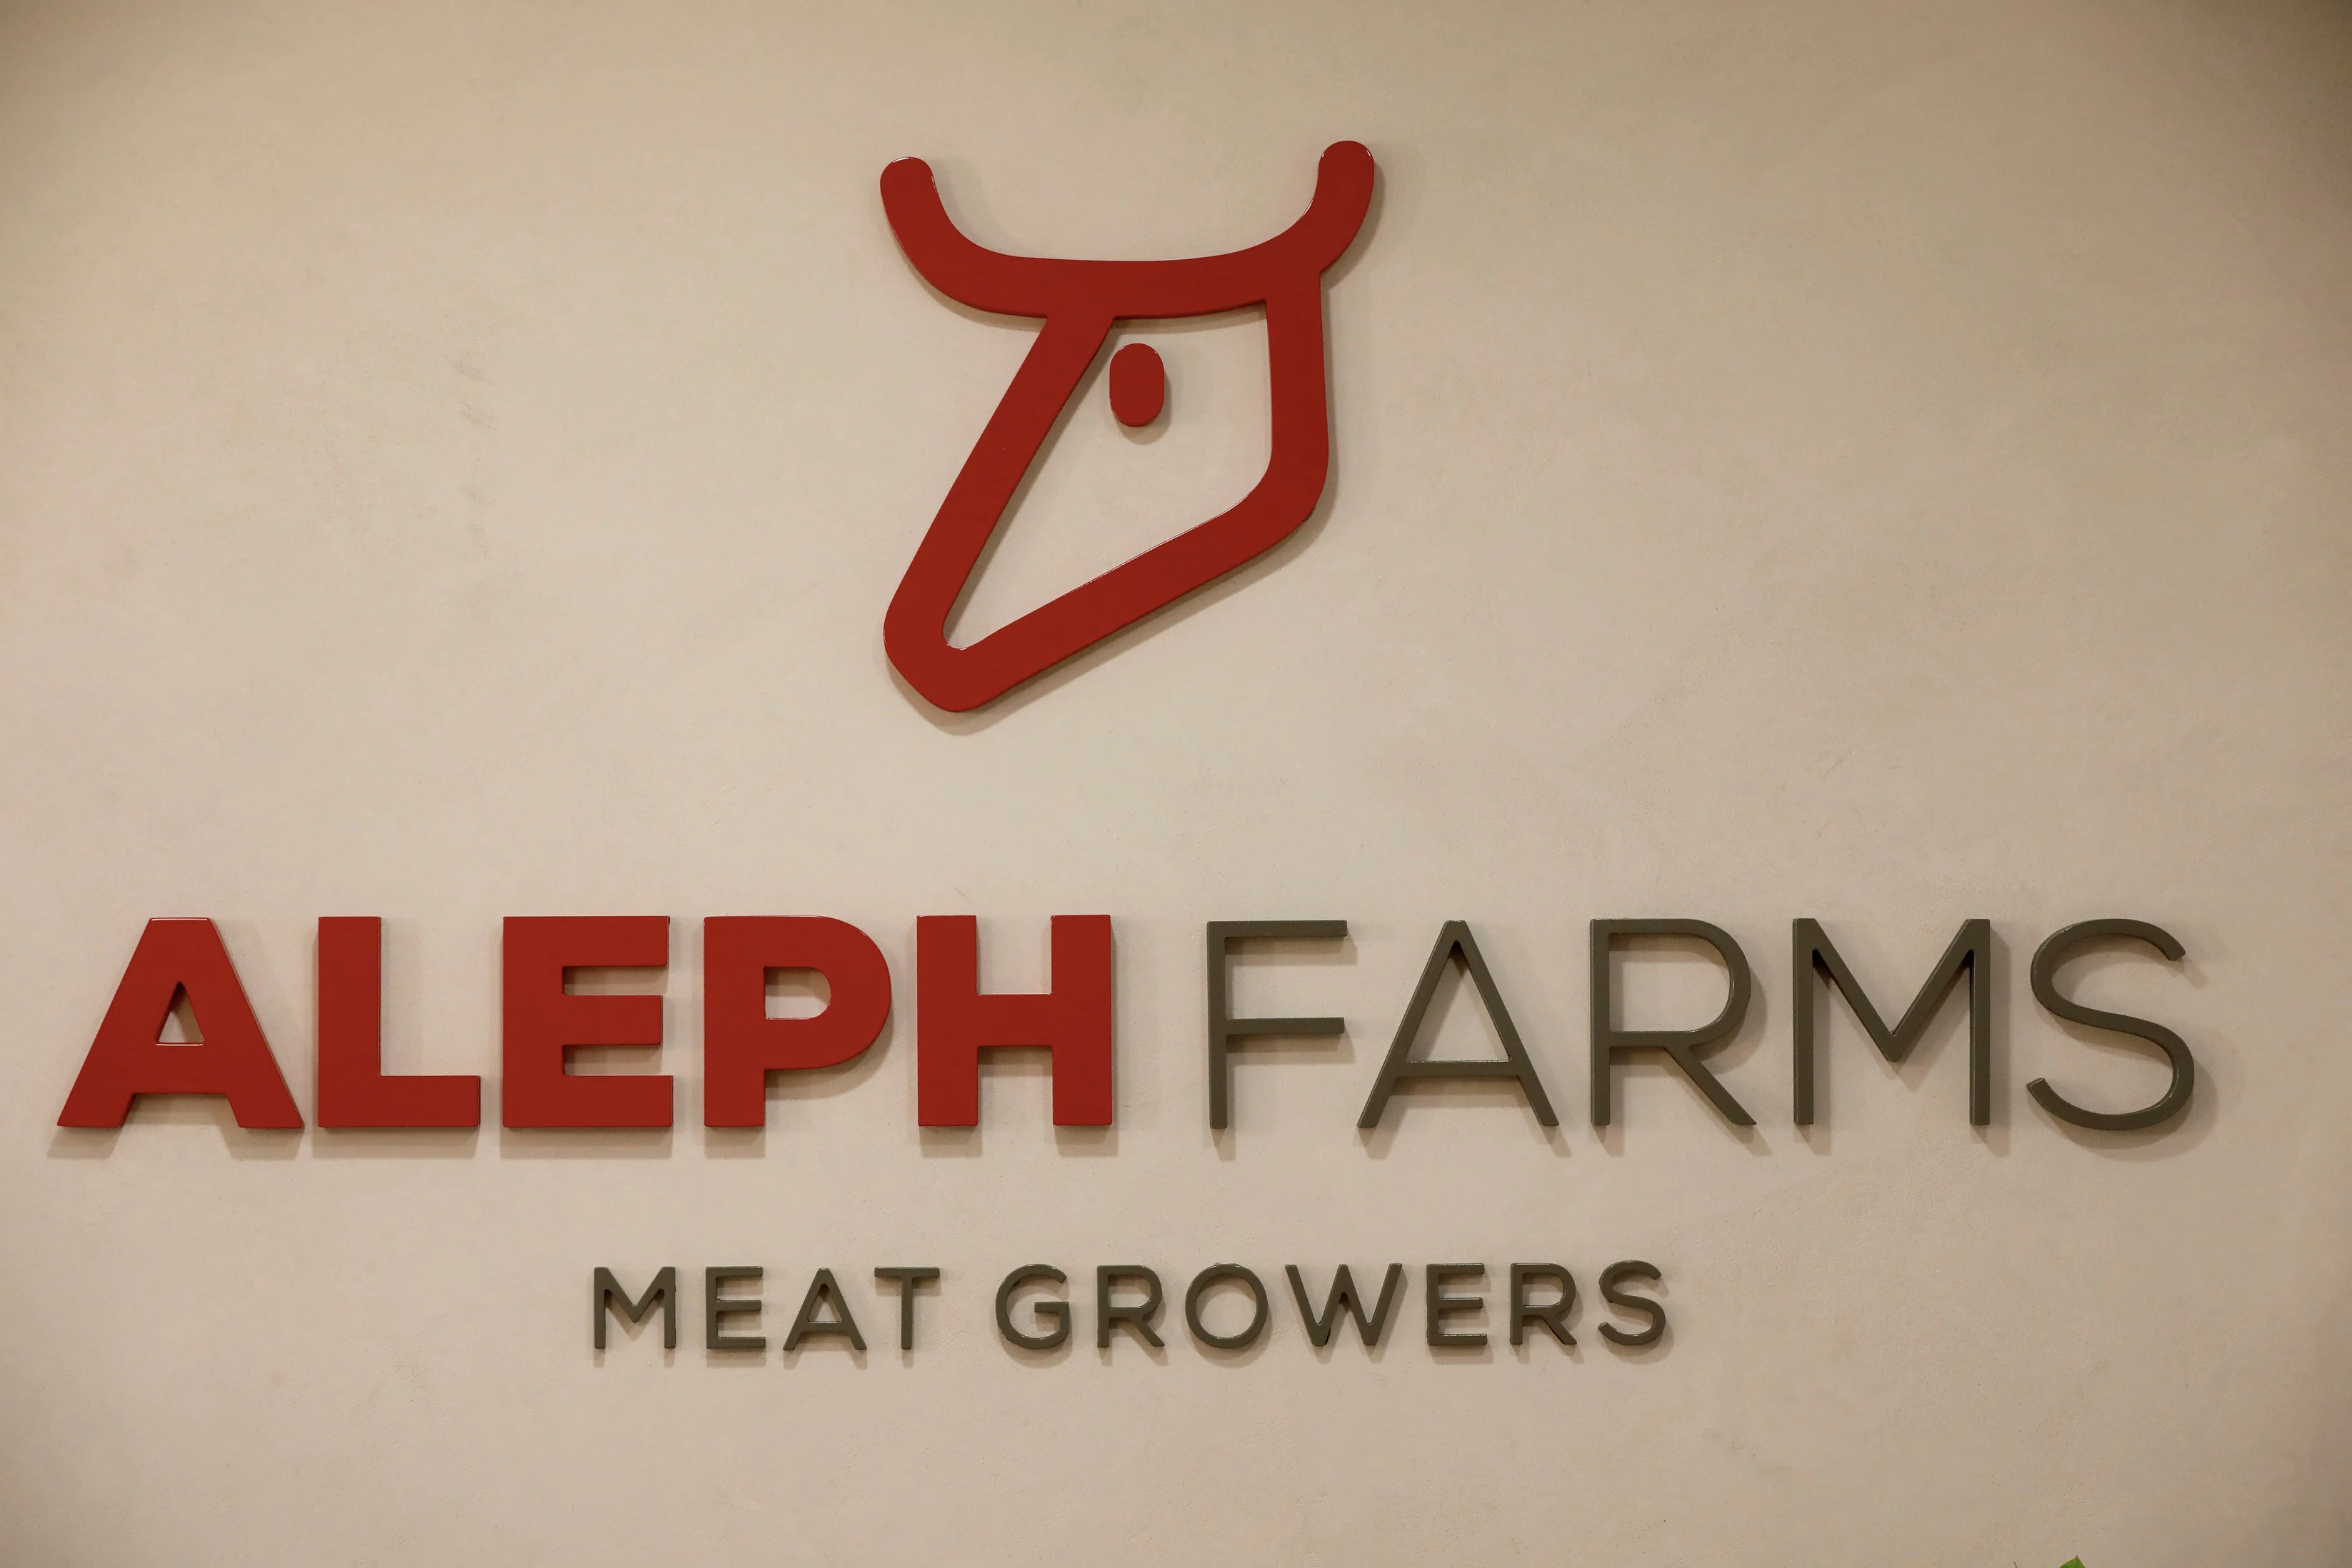 Logo Of Aleph Farms Is Seen At Their Office In Rehovot, Israel